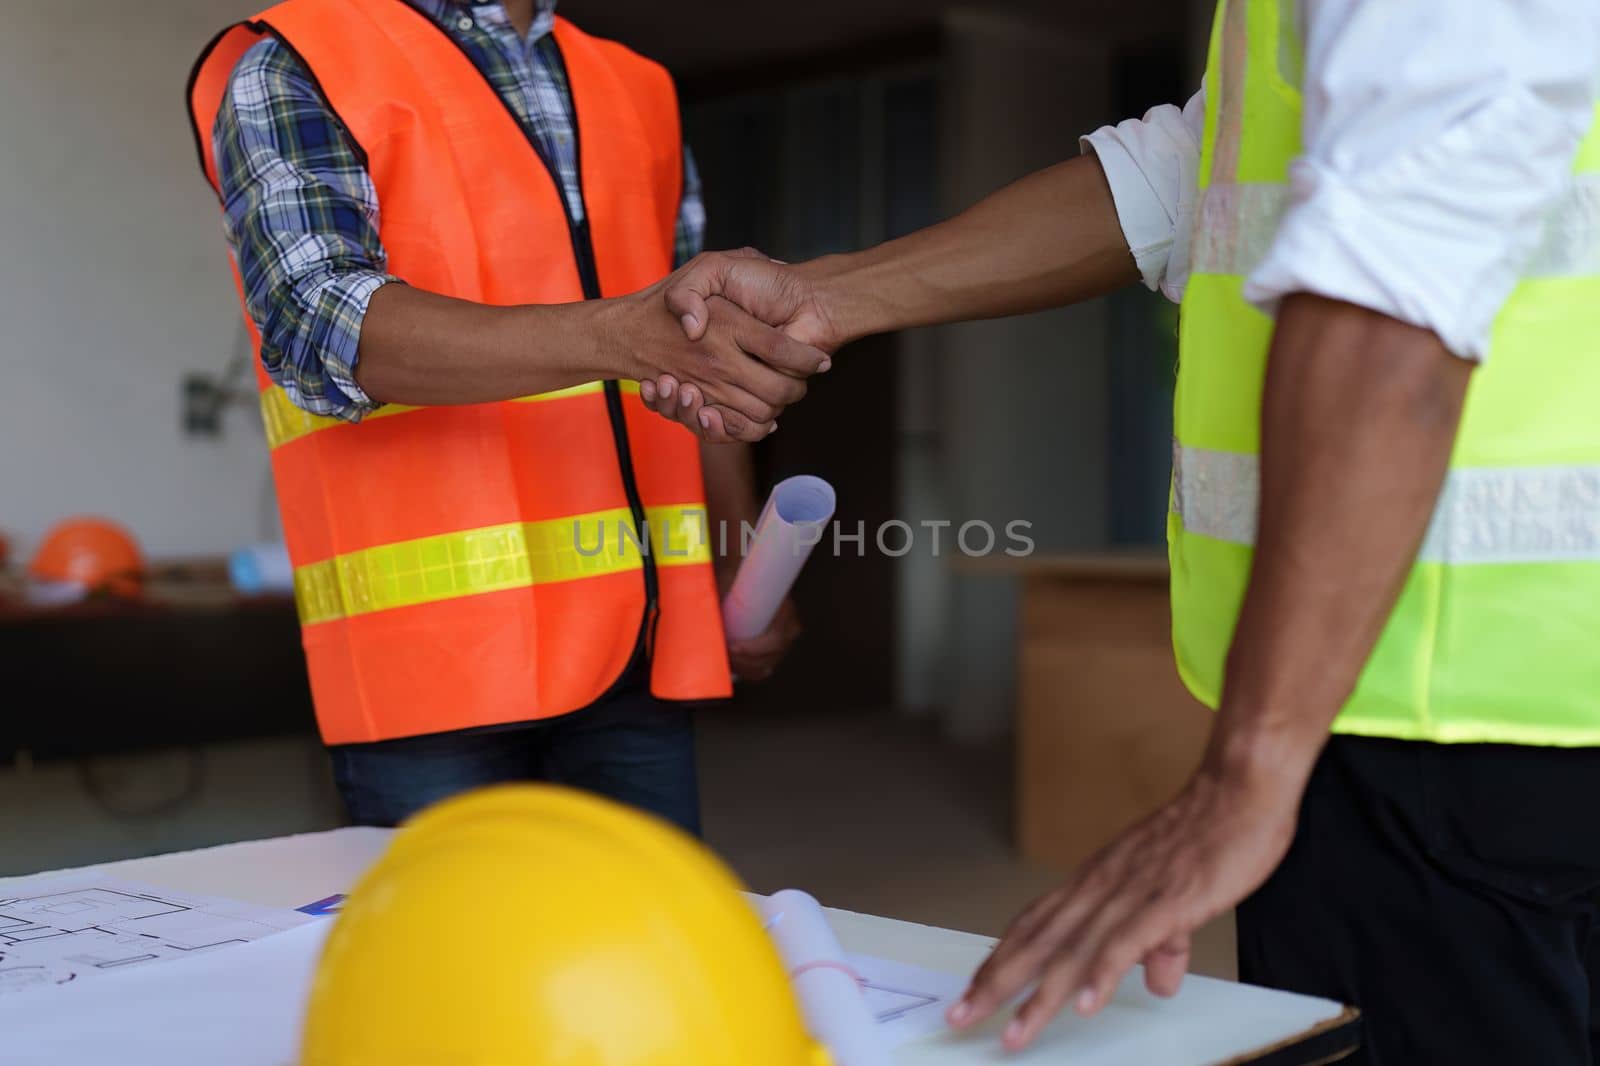 Architect and engineer construction workers shaking hands after finish an agreement in the office construction site, success collaboration concept.